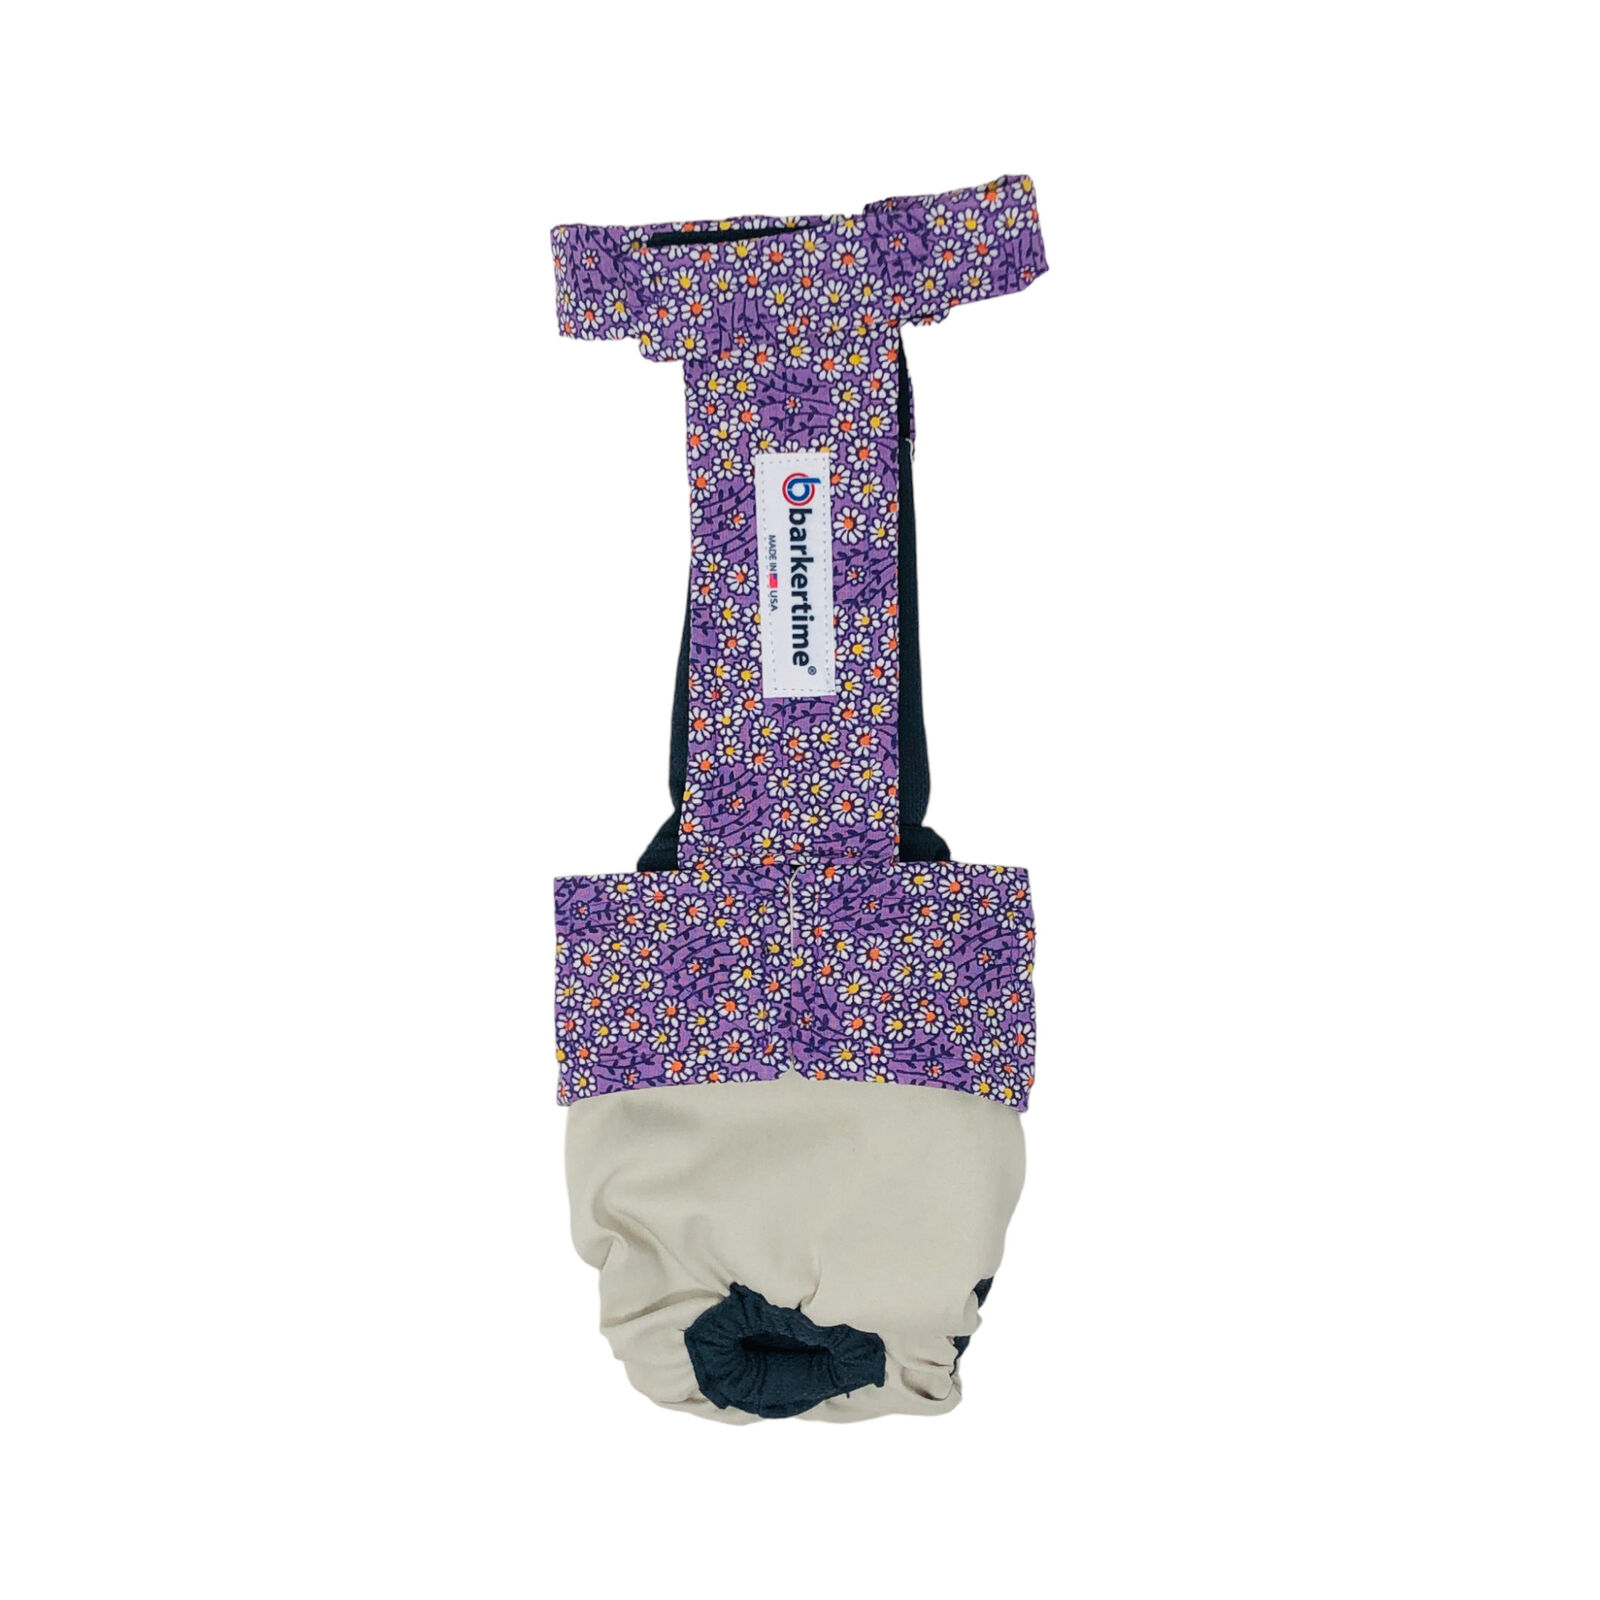 Dog Diaper Overall - Made in USA - Lavender Daisy Flower on Frosty Cream Esca...